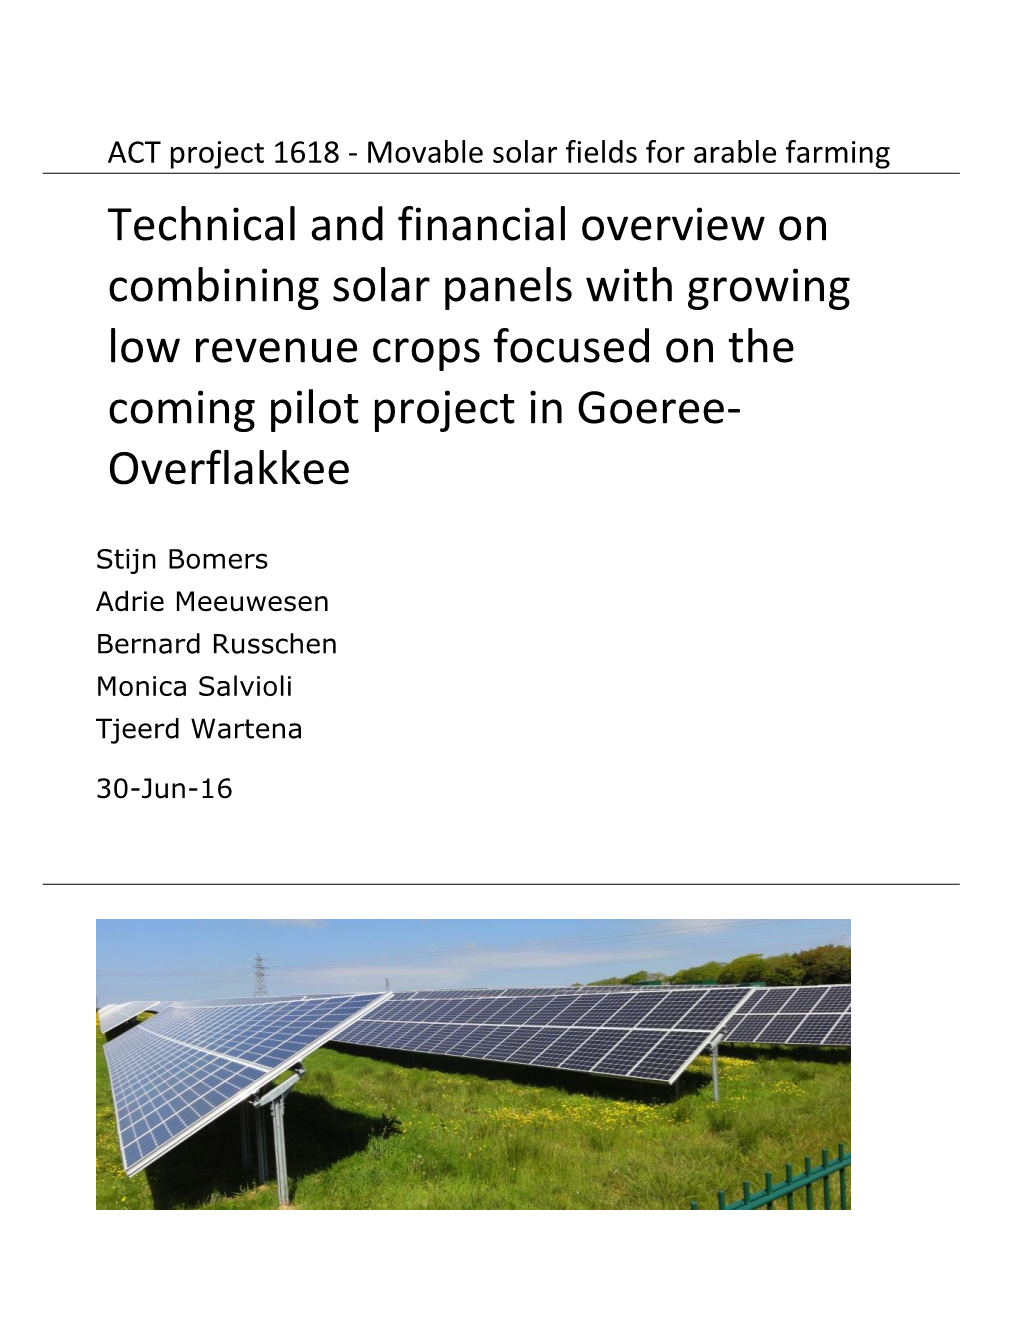 Technical and Financial Overview on Combining Solar Panels with Growing Low Revenue Crops Focused on the Coming Pilot Project in Goeree- Overflakkee